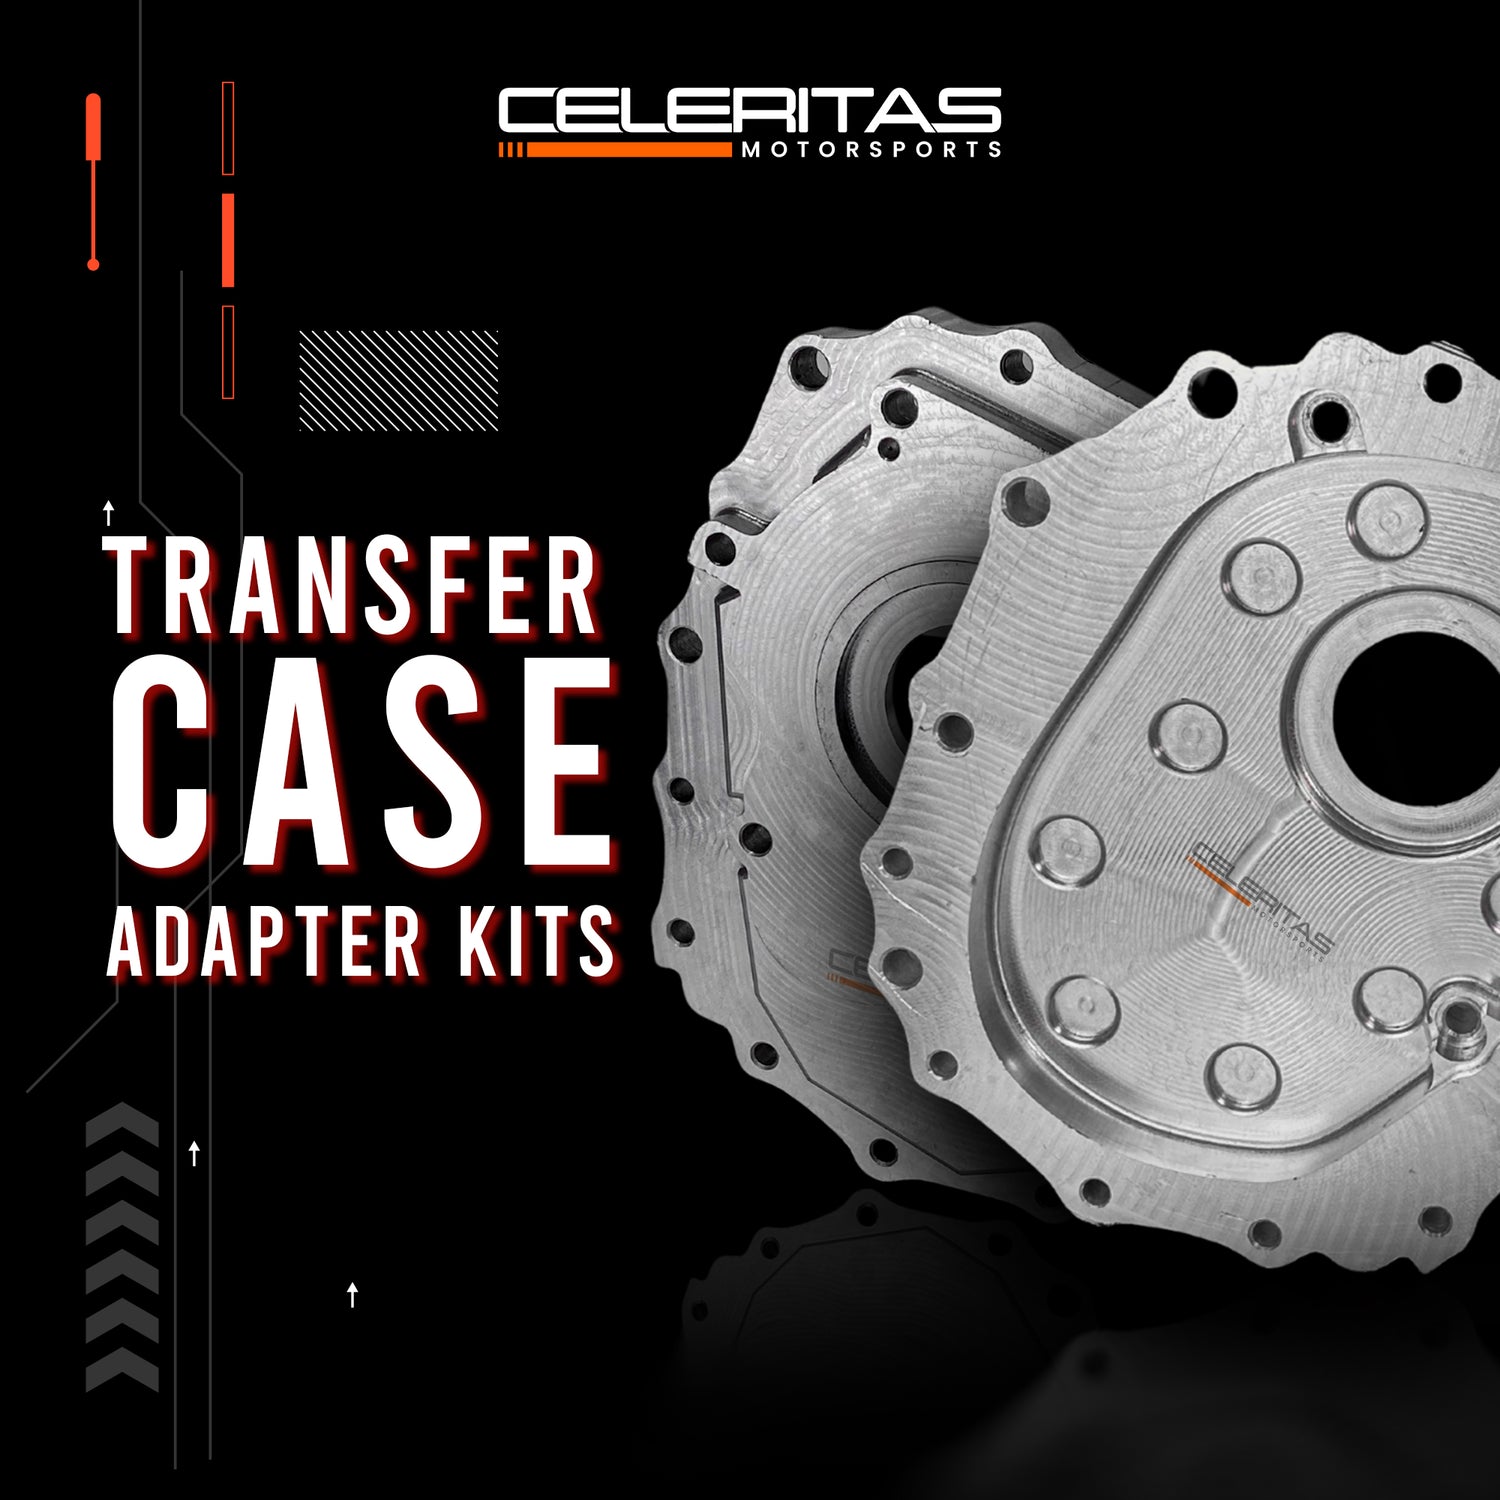 TRANSFER CASE ADAPTERS